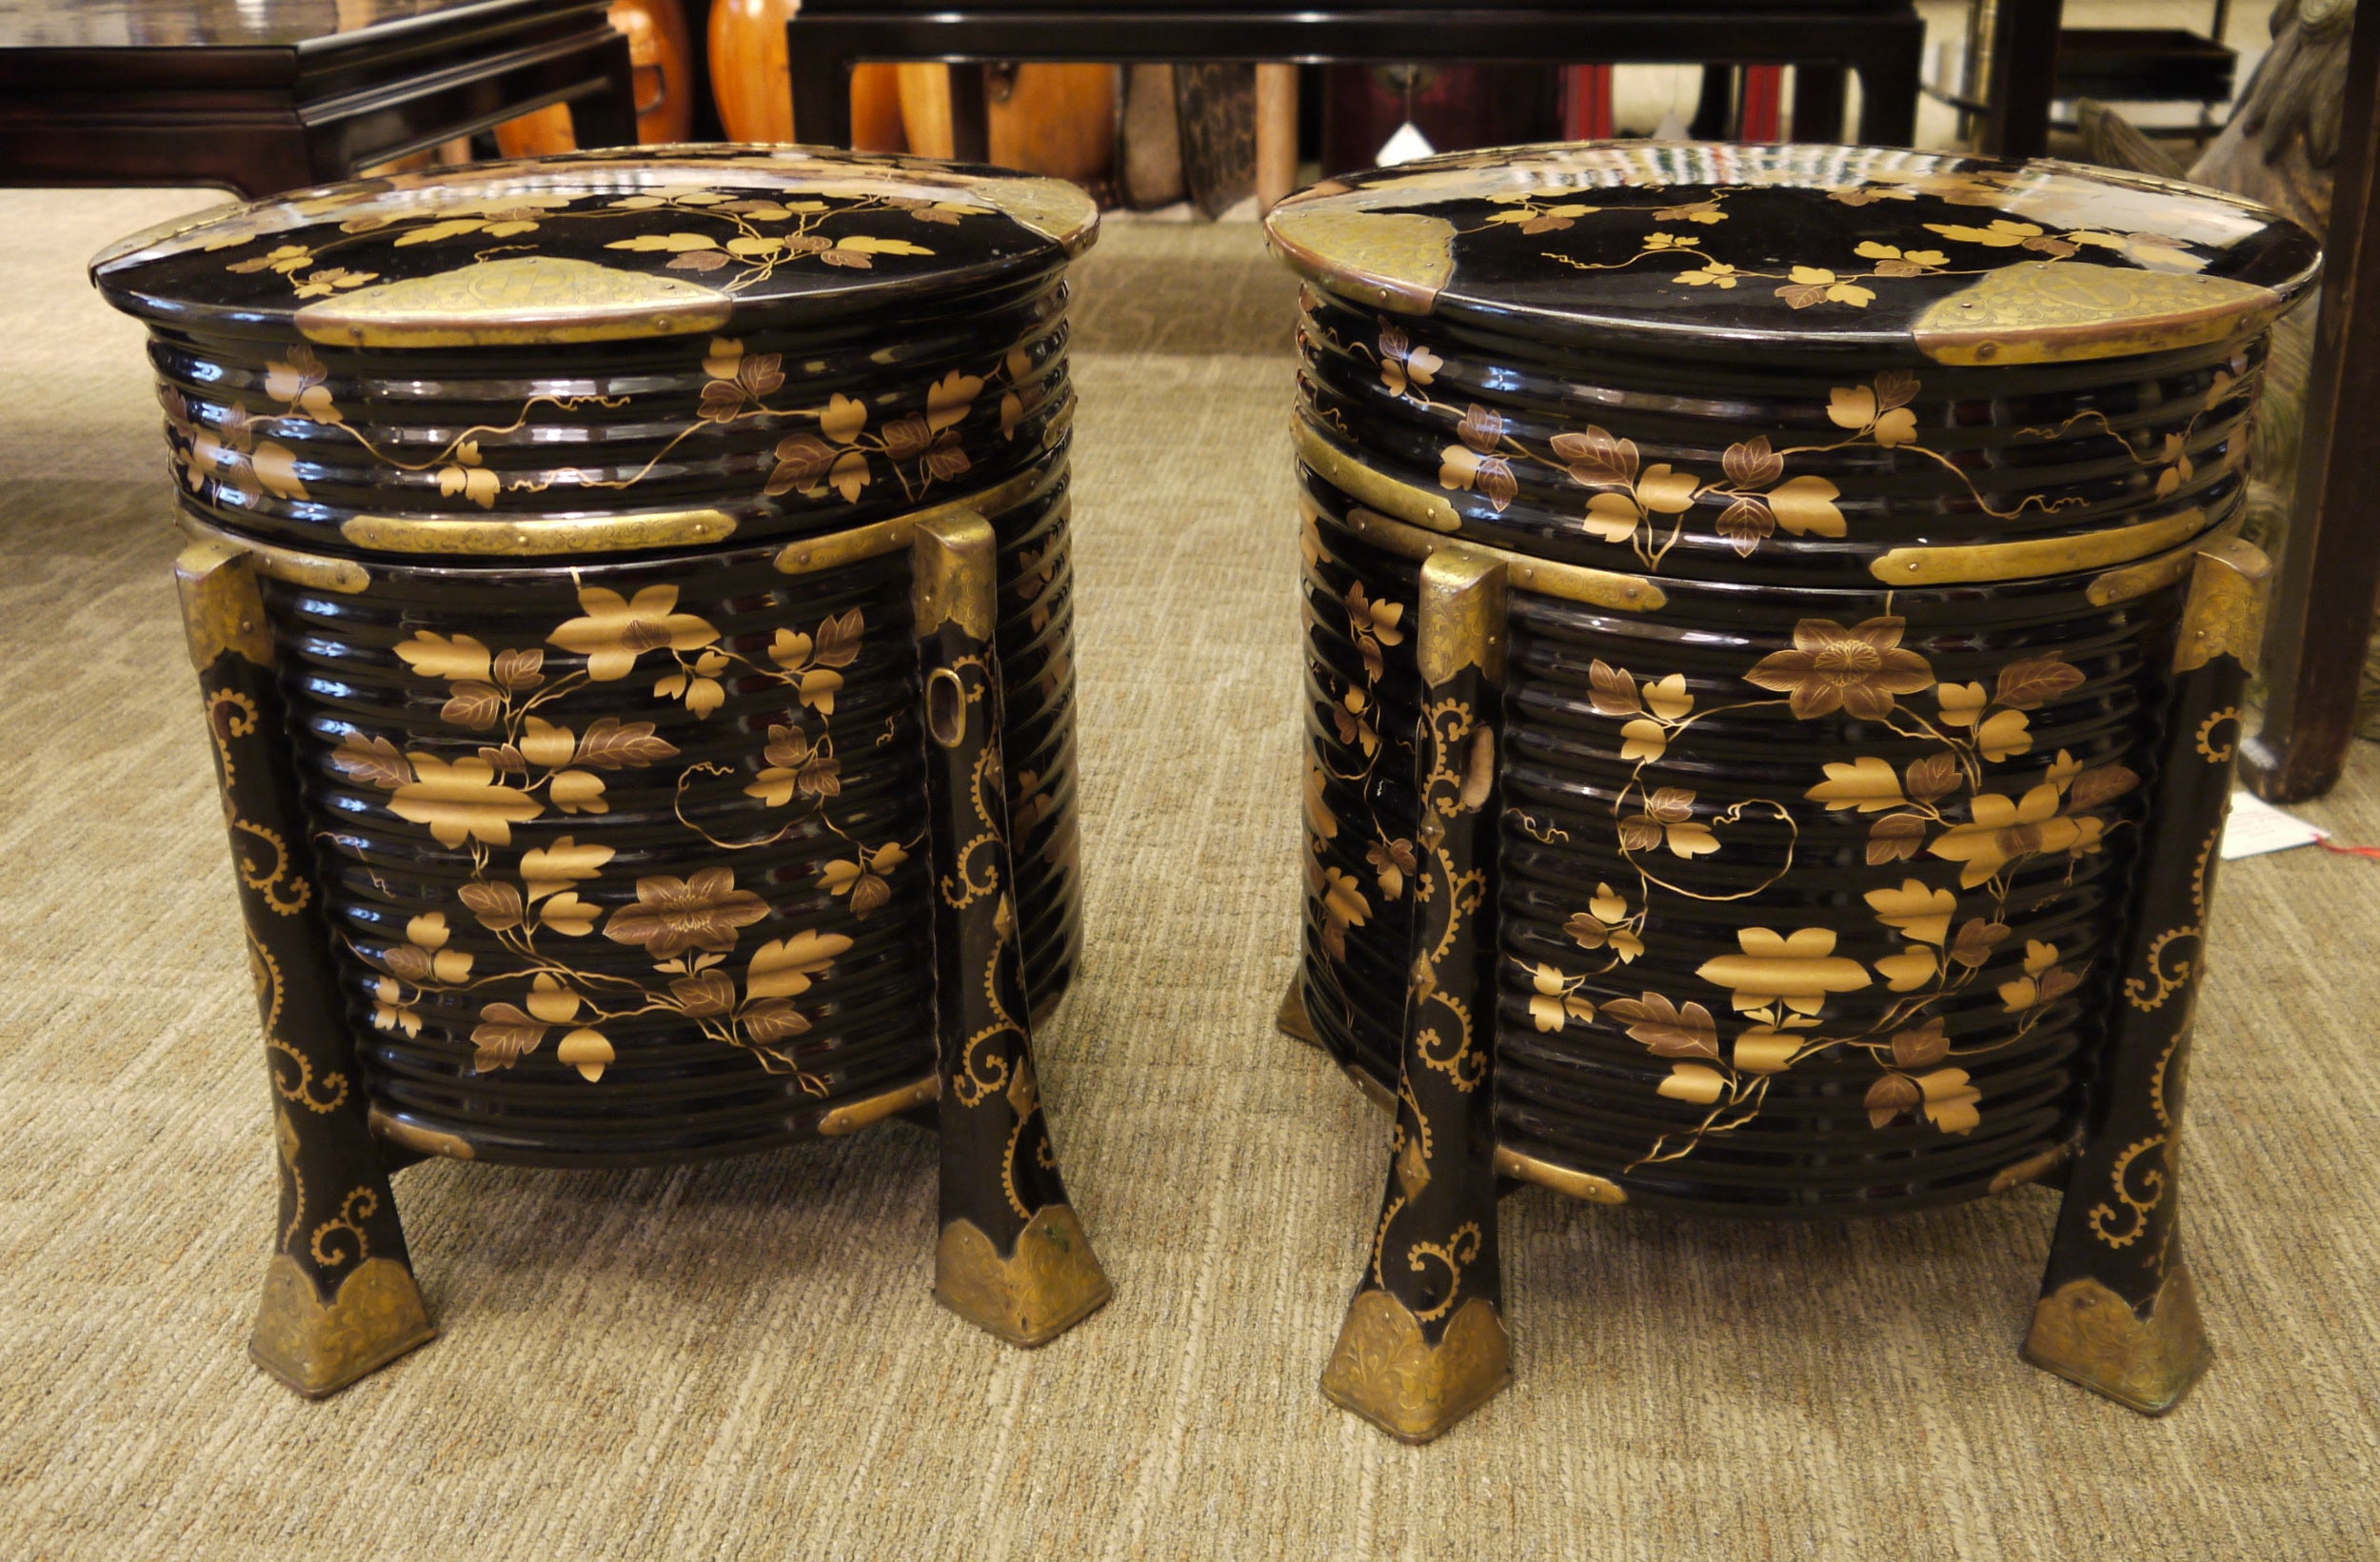 Pair of large Japanese Lacquer Boxes